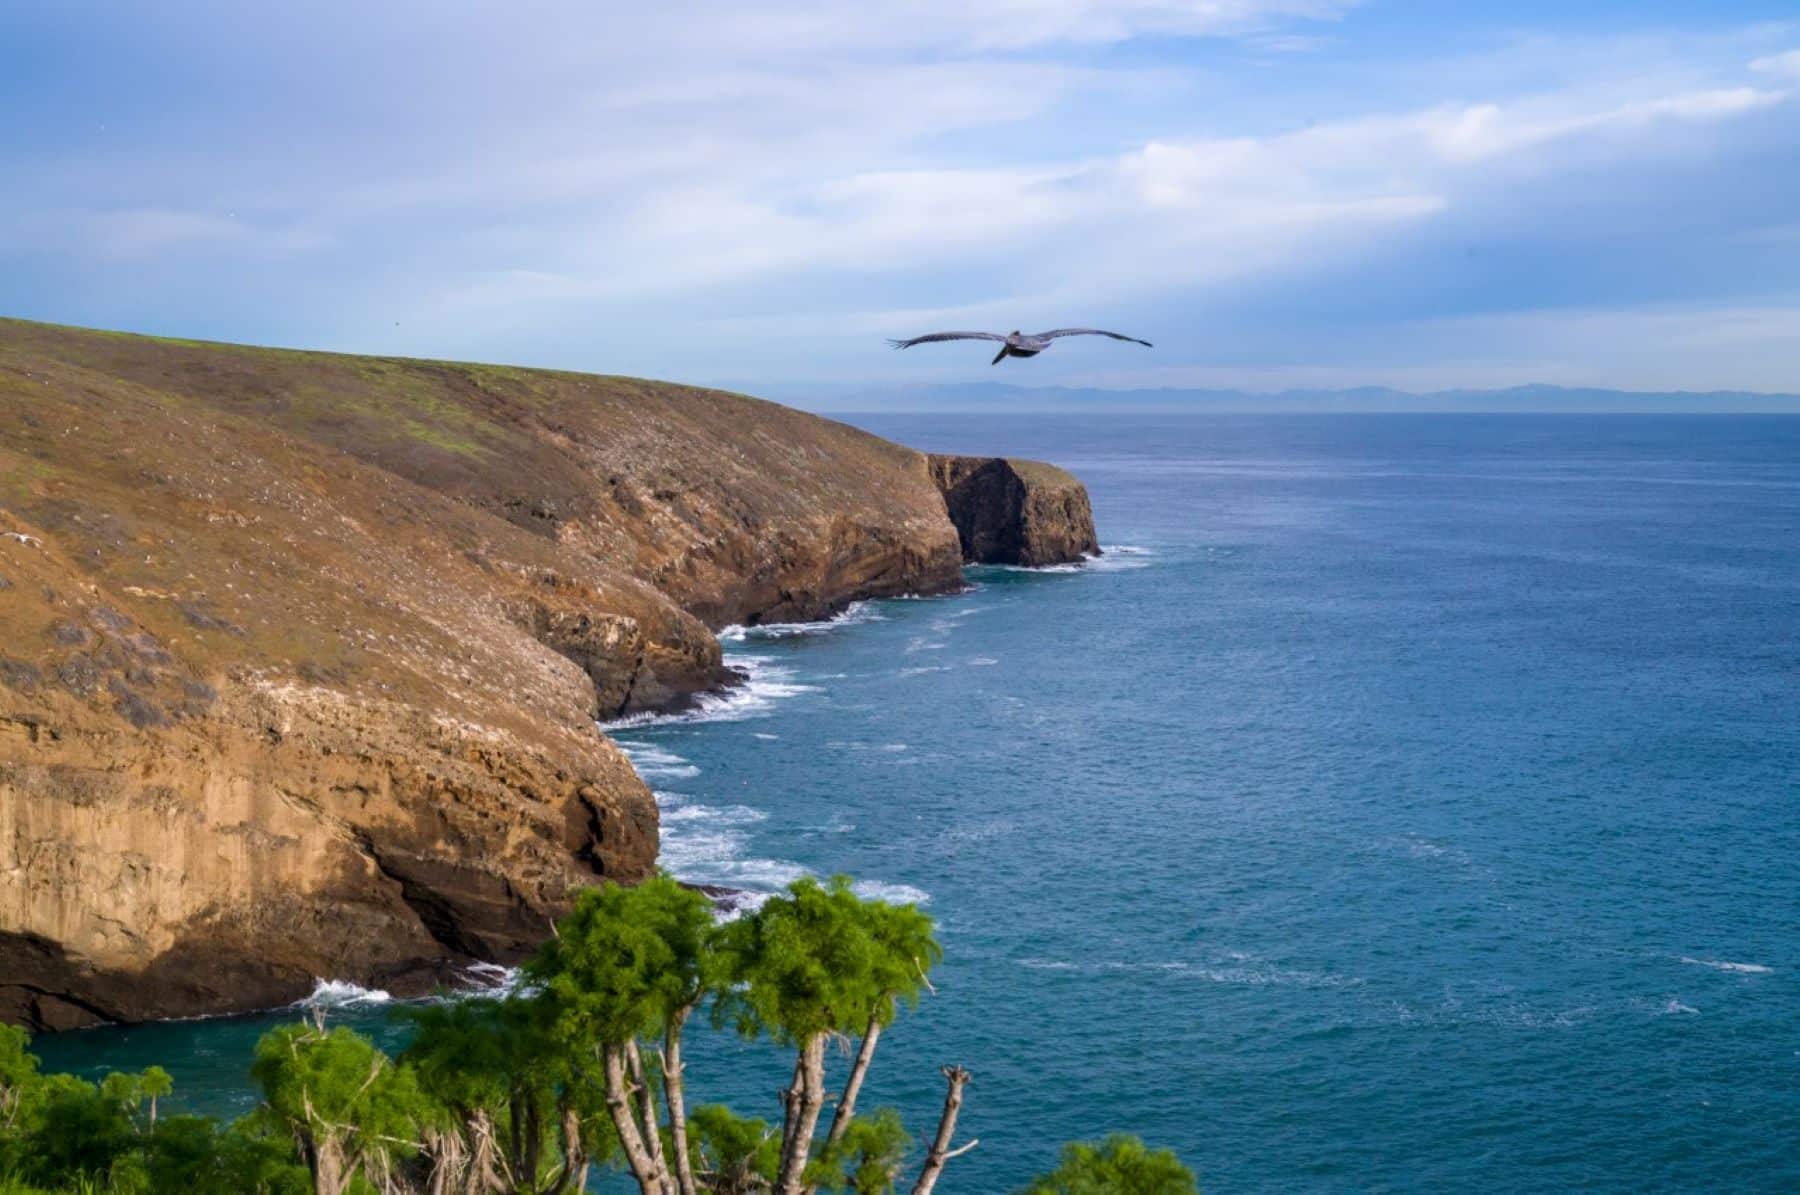 One of the best things to do in Channel Islands National Park is visit this remote island of Santa Barbara, seen here with a pelican flying over the water.